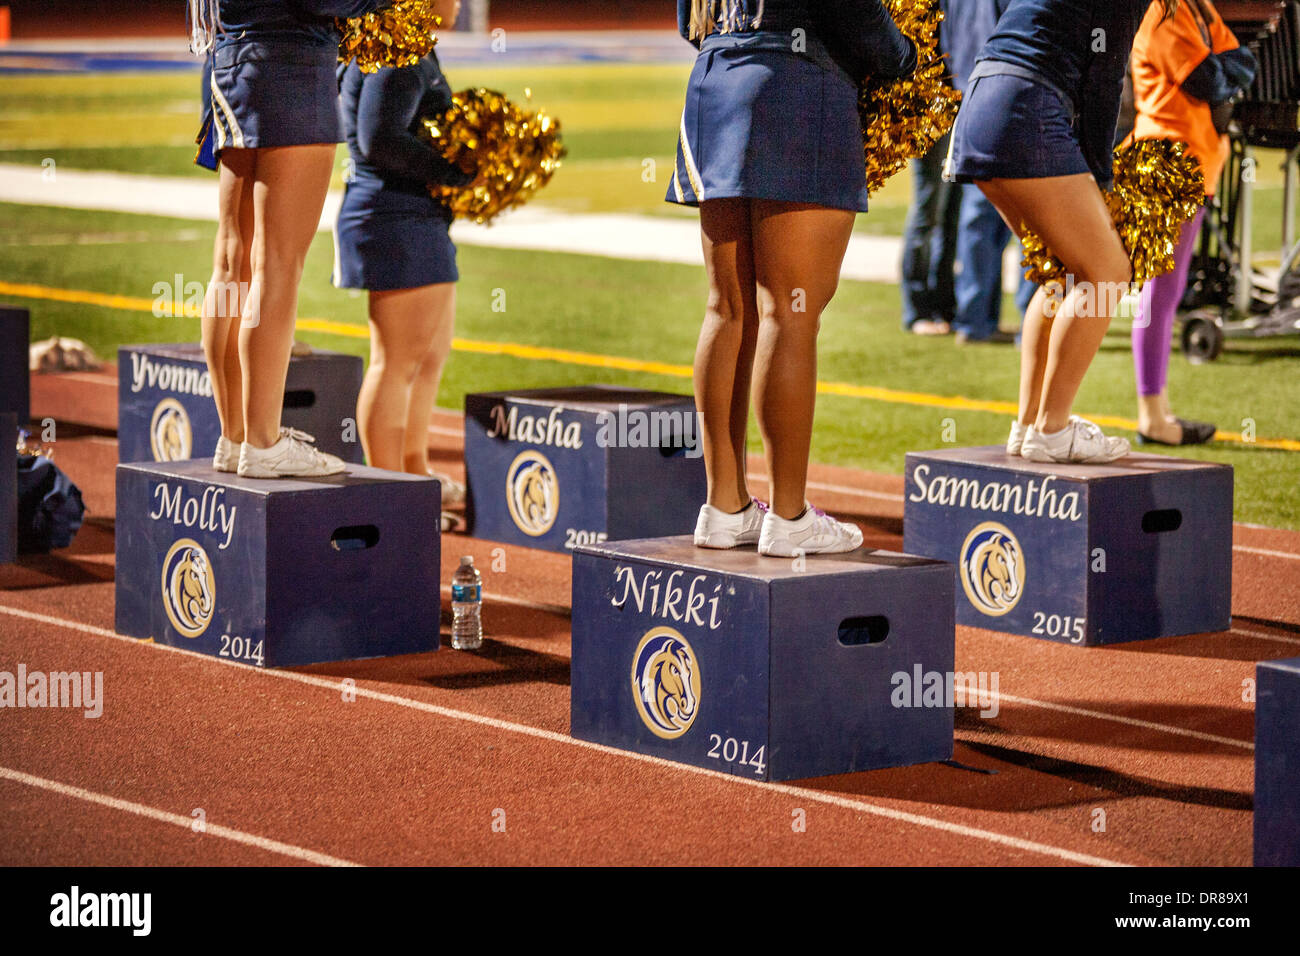 Cheerleaders stand on personalized platforms during a night high school football game in San Juan Capistrano, CA. Stock Photo